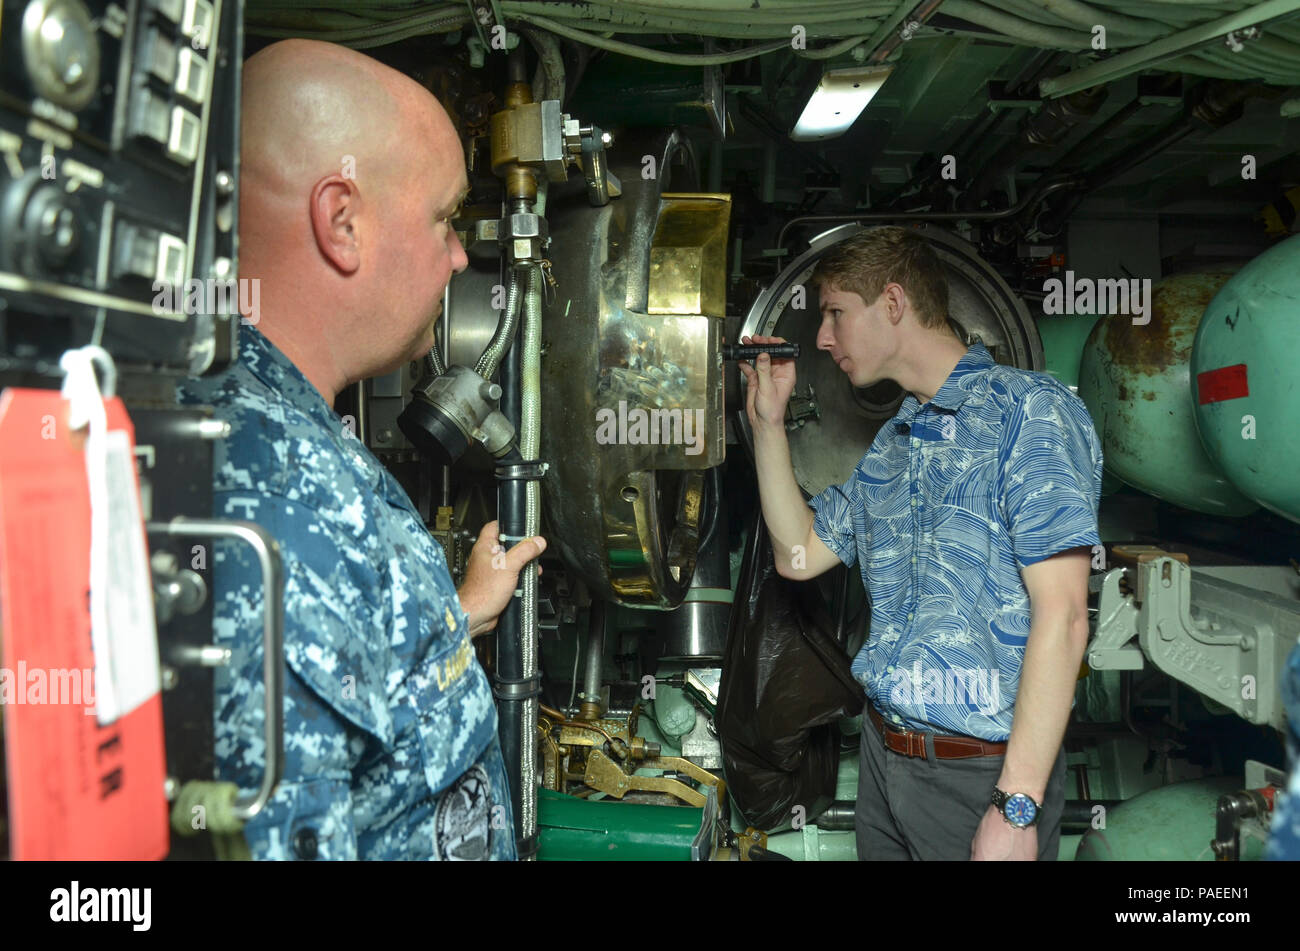 POLARIS POINT, Guam (March 30, 2016) —  Cmdr. David Lammers, commanding officer of the Los Angeles-class fast attack submarine USS Topeka (SSN 754), watches as guest civilian Will Rogers, a military legislative assistant, looks down a torpedo tube in the torpedo room, March 30.  Topeka is currently alongside the Emory S. Land-class submarine tender USS Frank Cable (AS40). Frank Cable, forward deployed to the island of Guam conducts maintenance and support of submarines and surface vessels deployed to the U.S. 7th Fleet area of responsibility.  (U.S. Navy photo by Mass Communication Seaman Appr Stock Photo